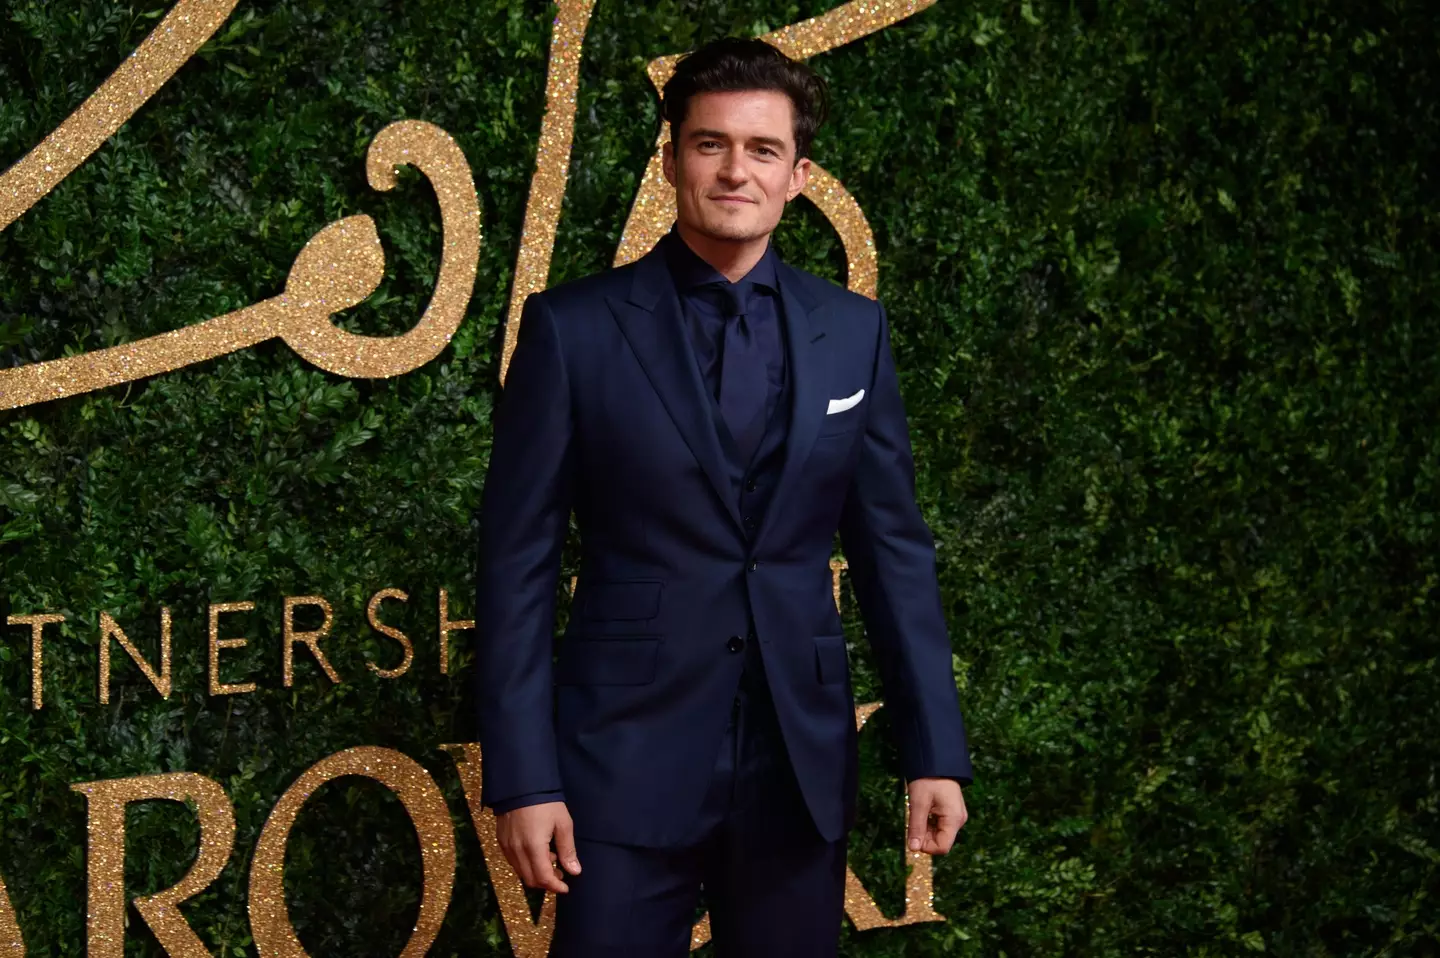 Orlando Bloom has opened up about his mental health after a near death experience.